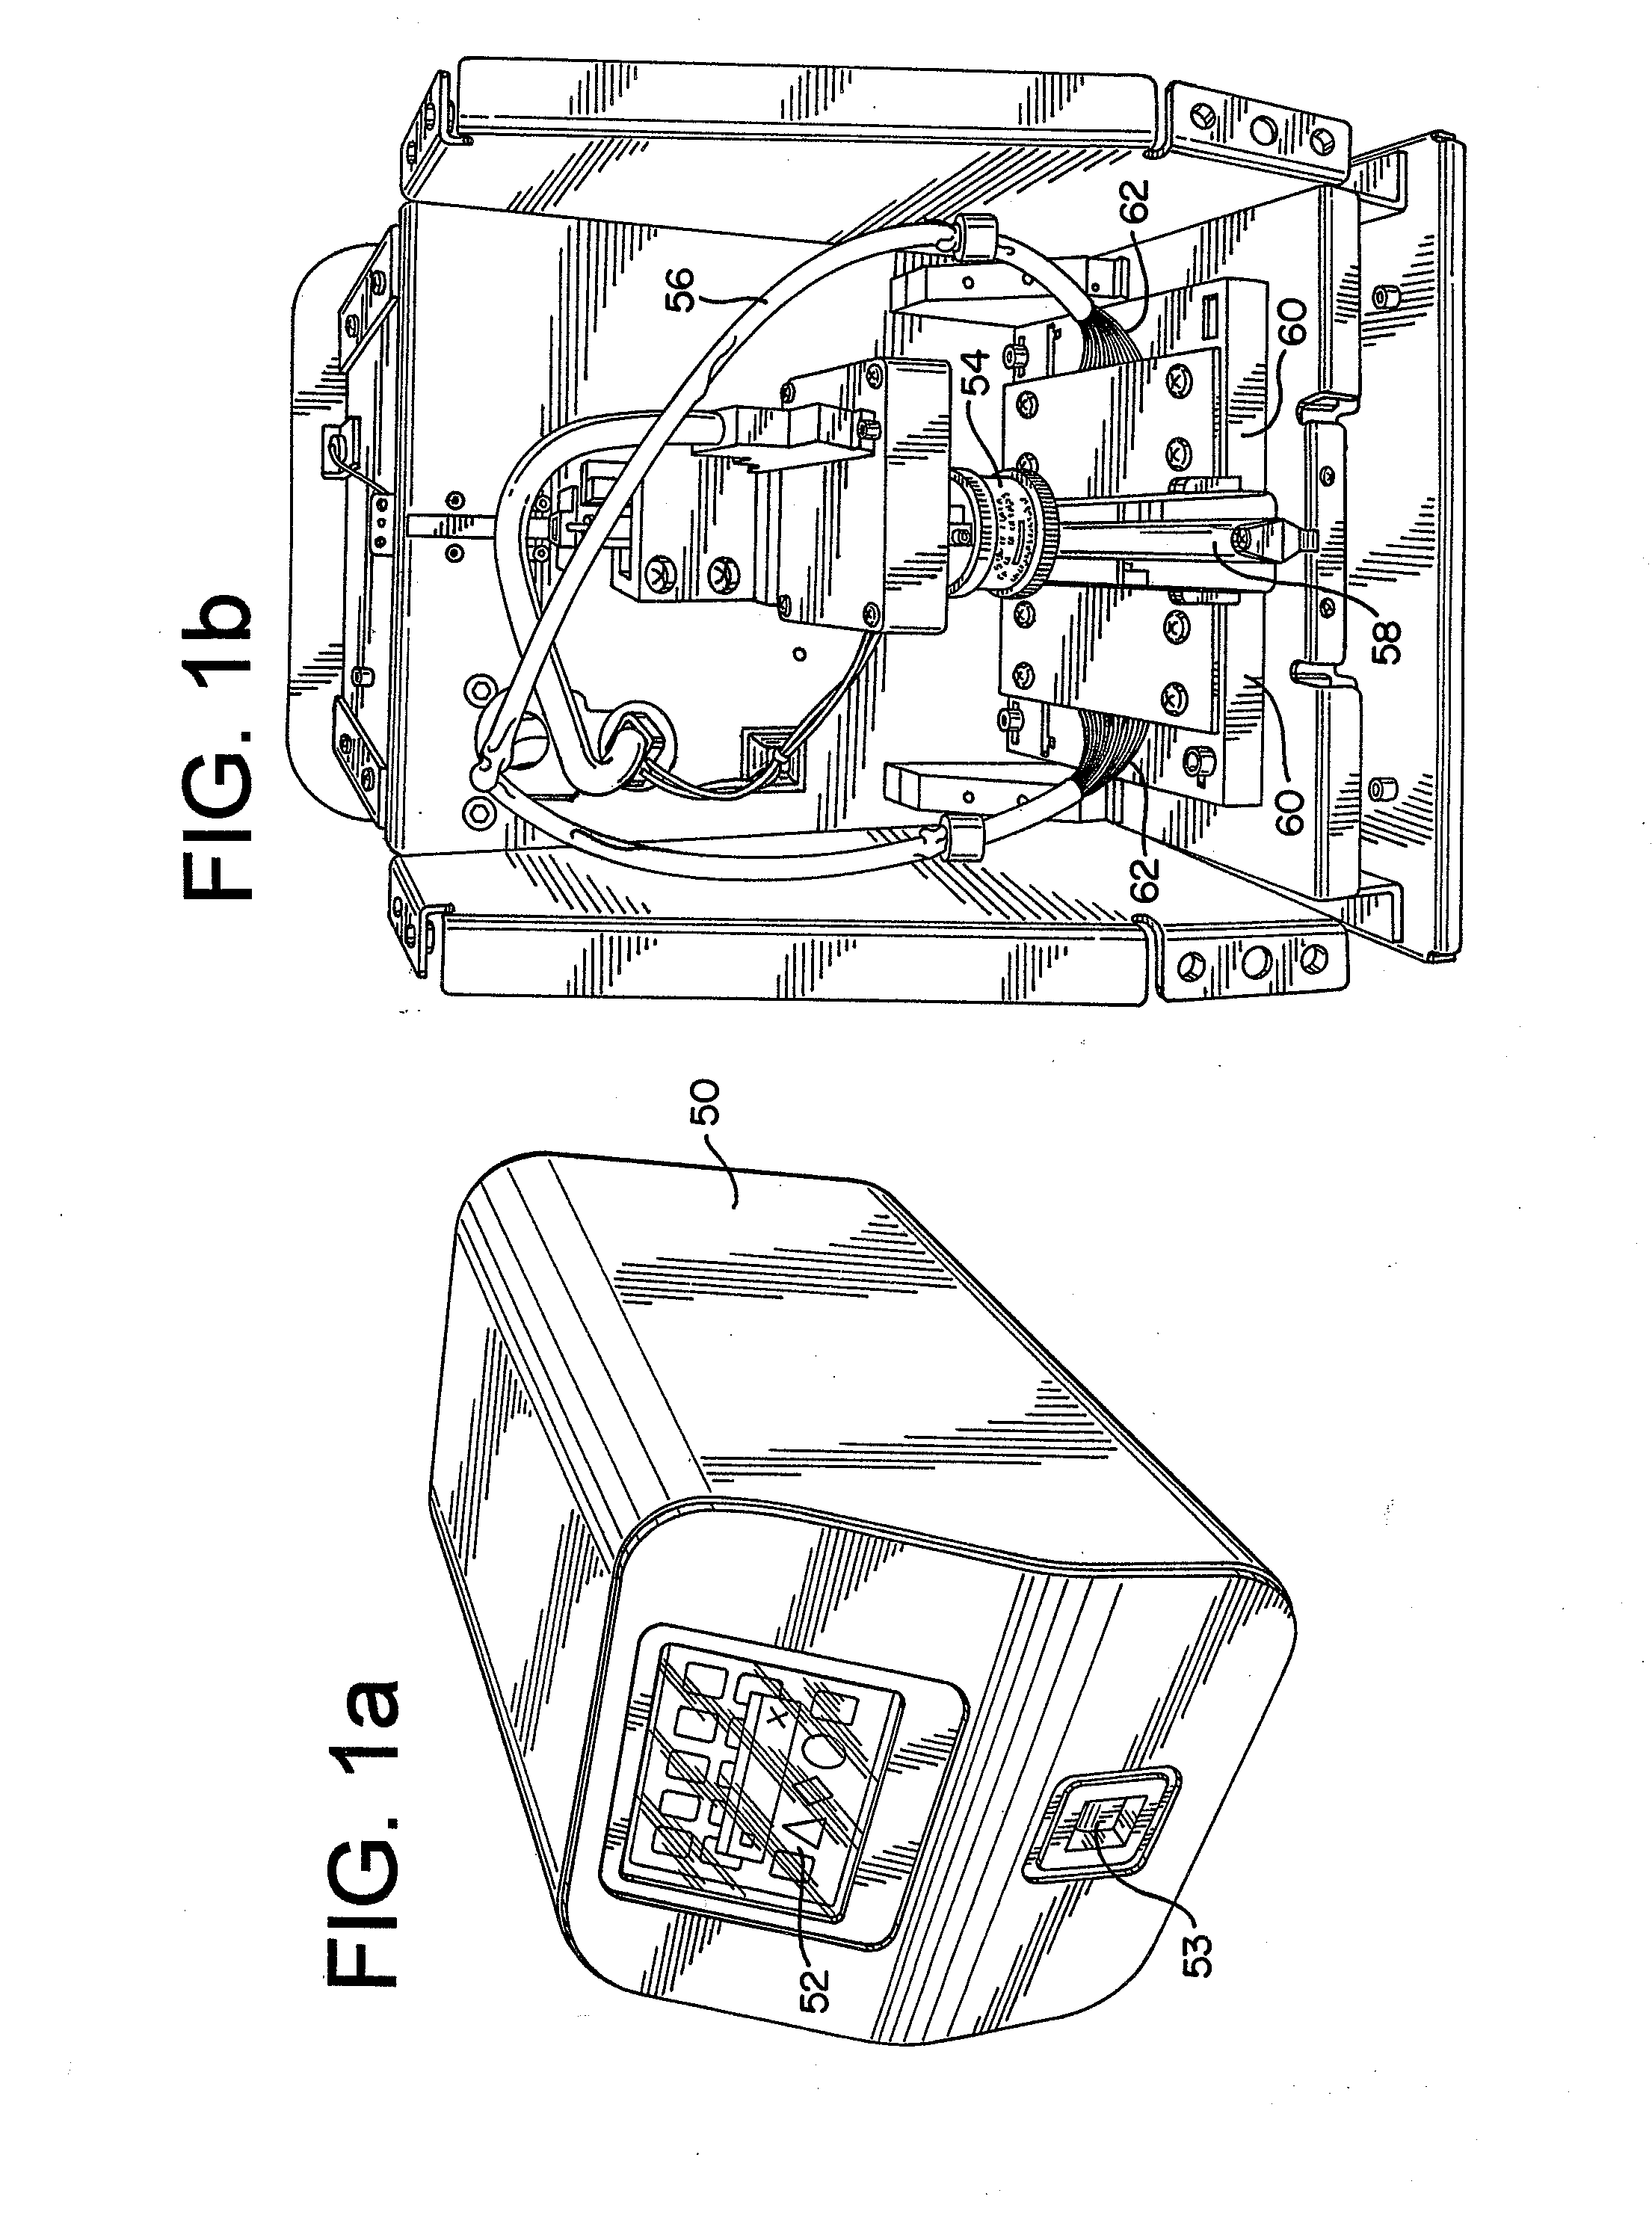 Nanoparticle Imaging System And Method